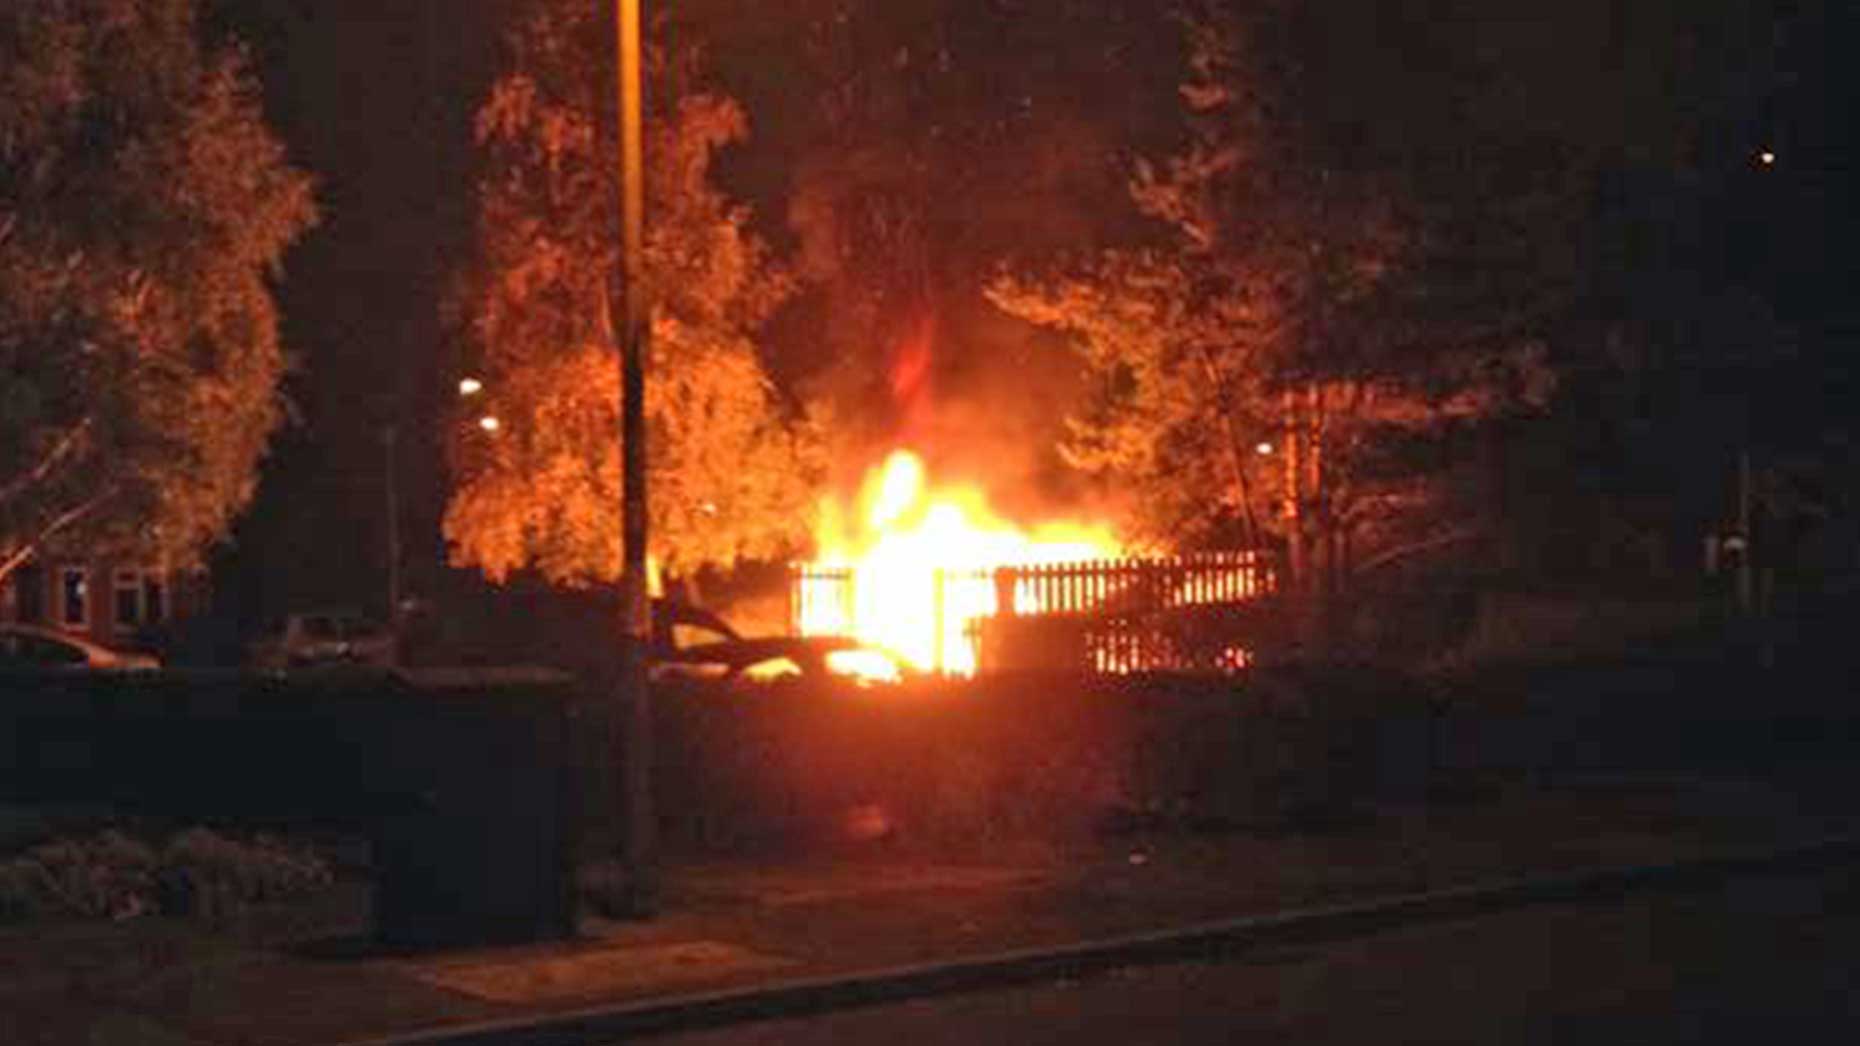 Wheelie bins on fire on Epsom Close in Lincoln on September 19. Photo: Nigel Smith